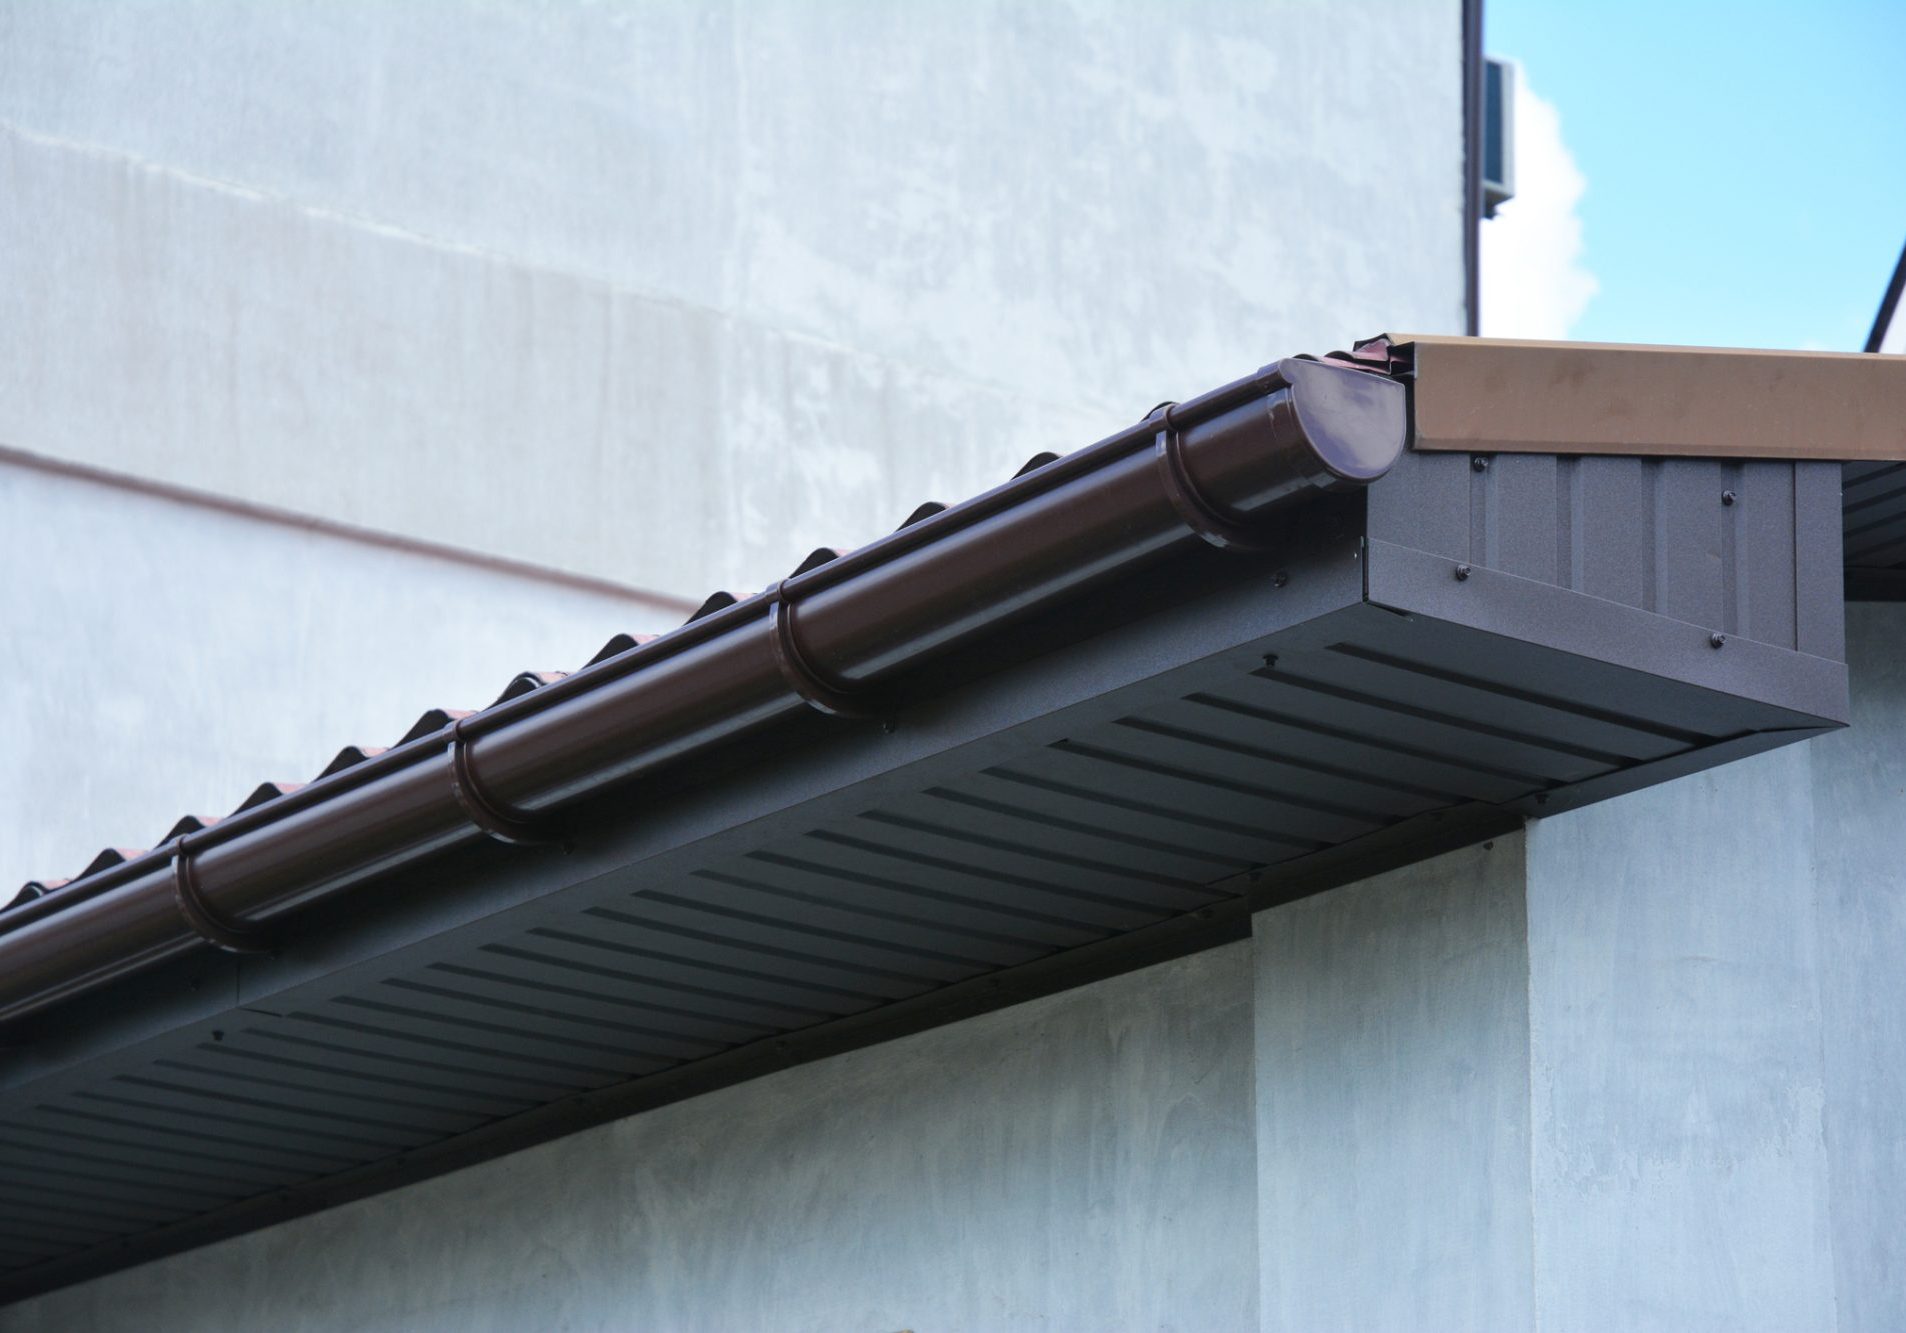 Close up on house plastic roof gutter with soffit and fascia board.